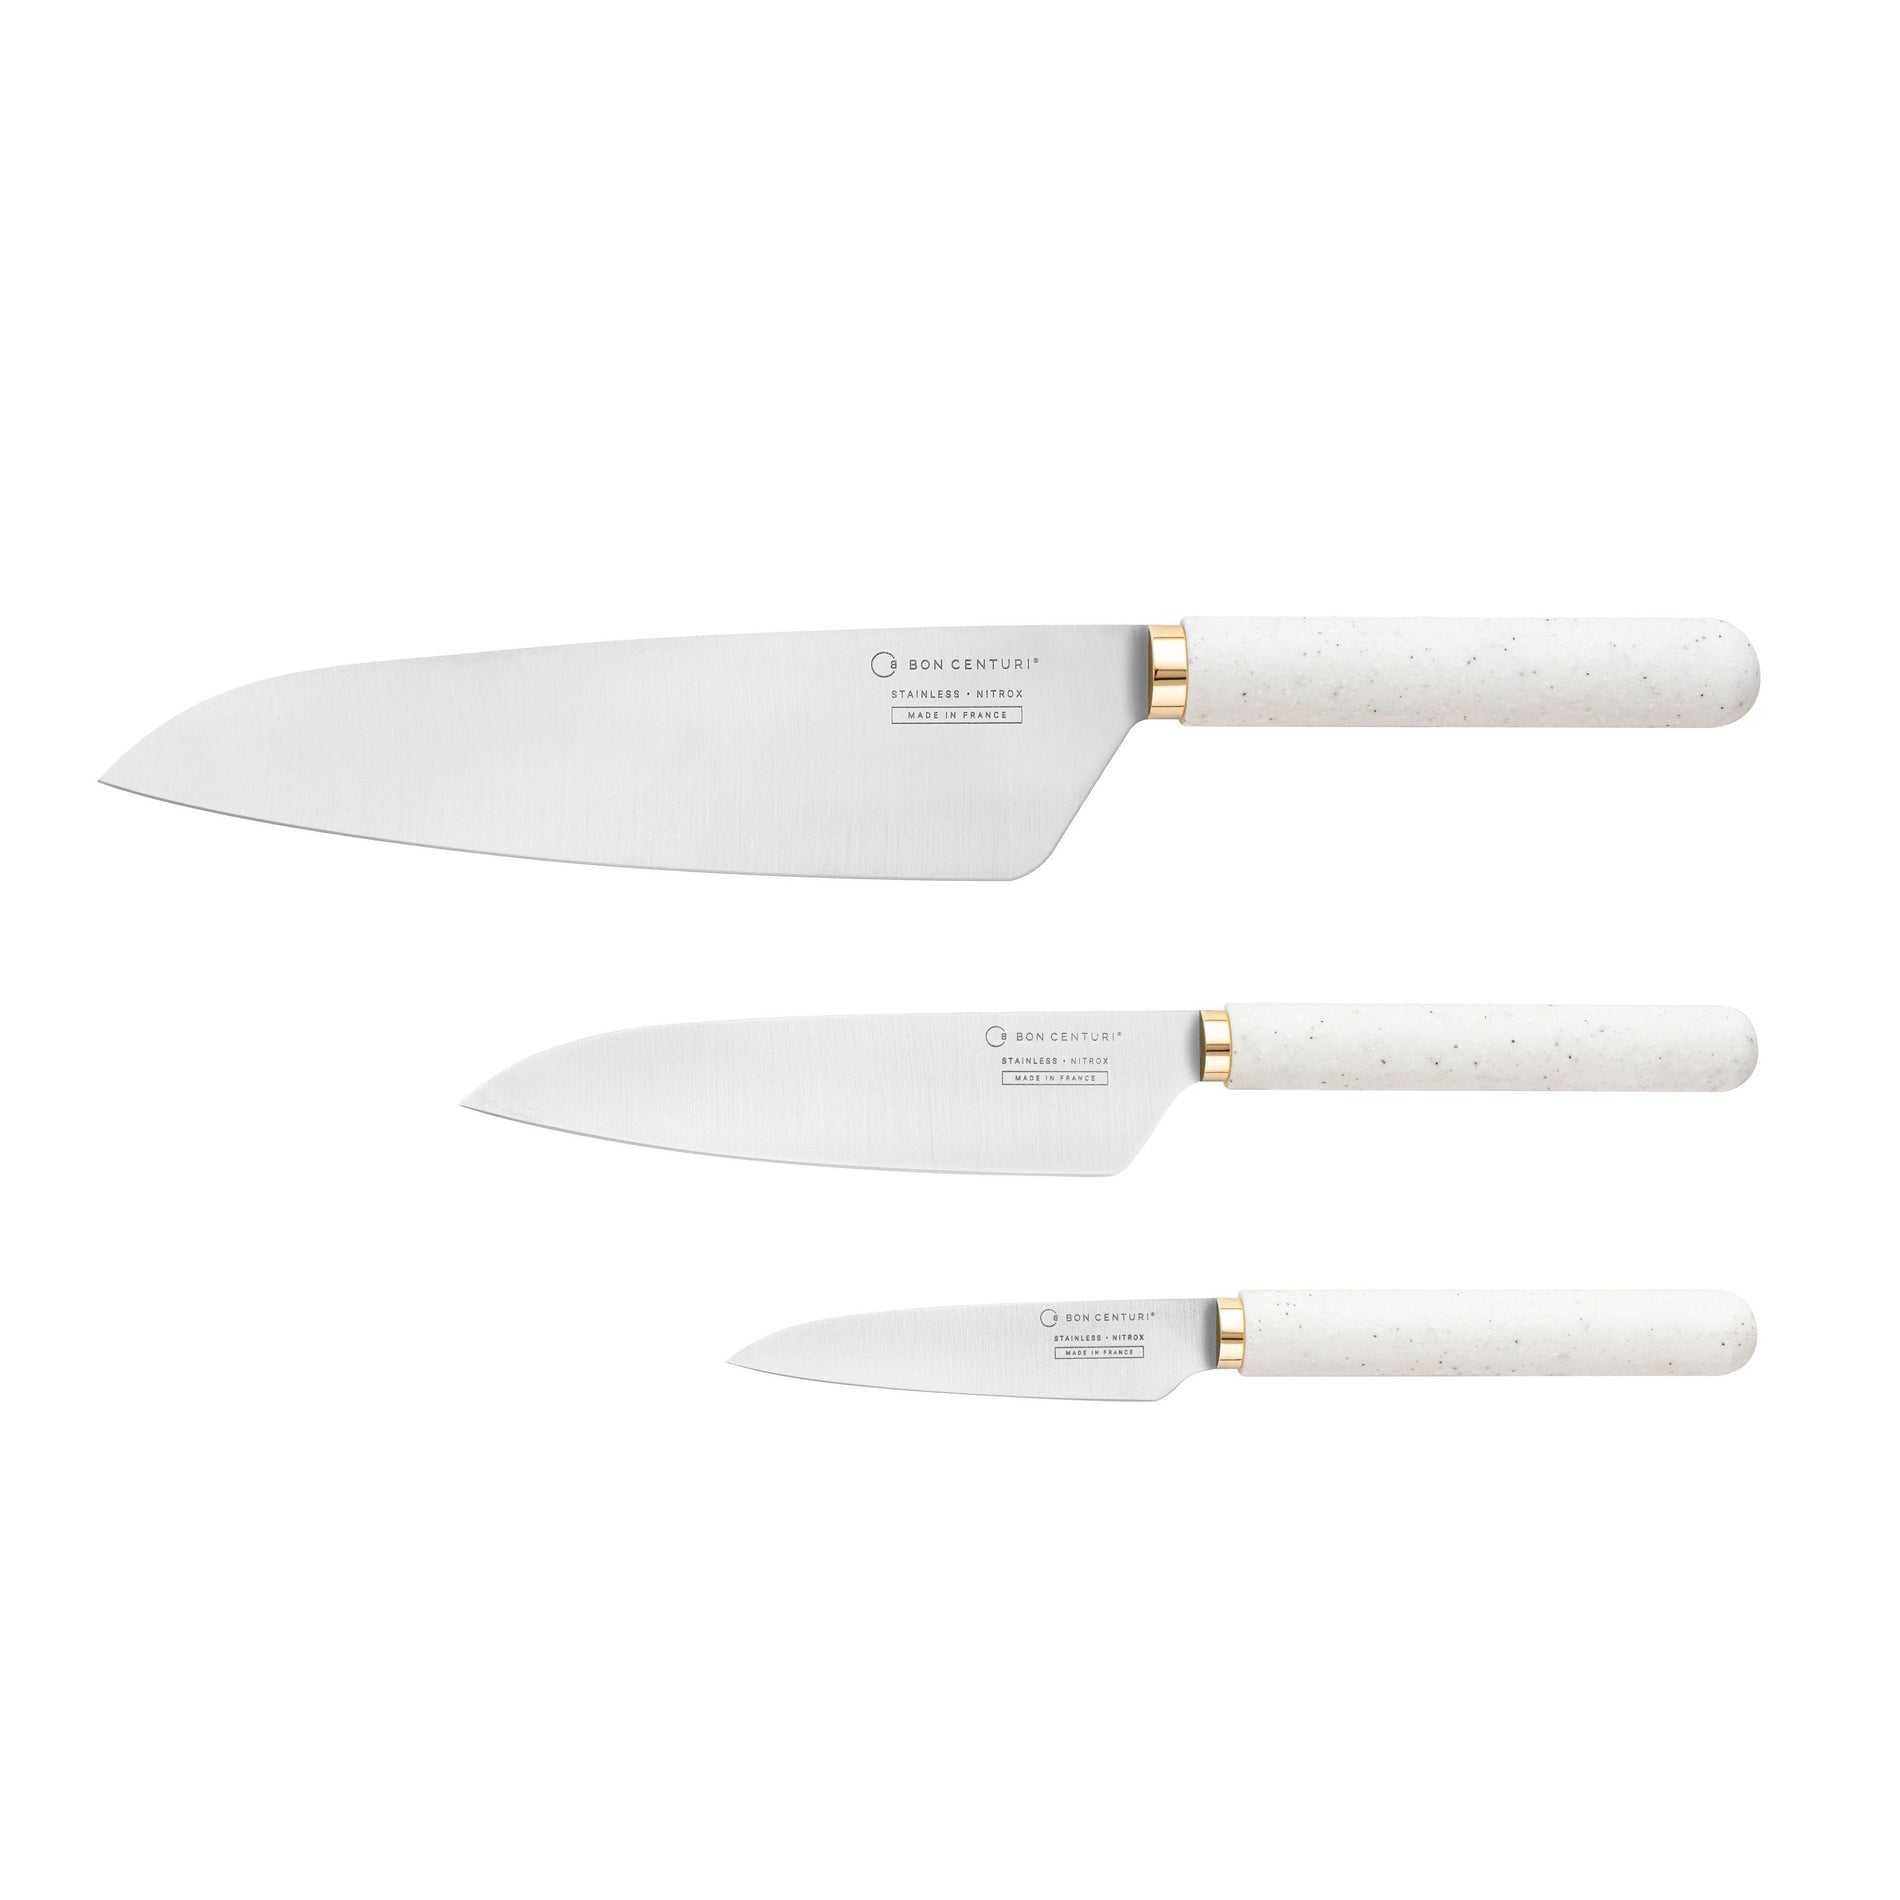 Discontinued 6 piece White Marble Steak Knife Set